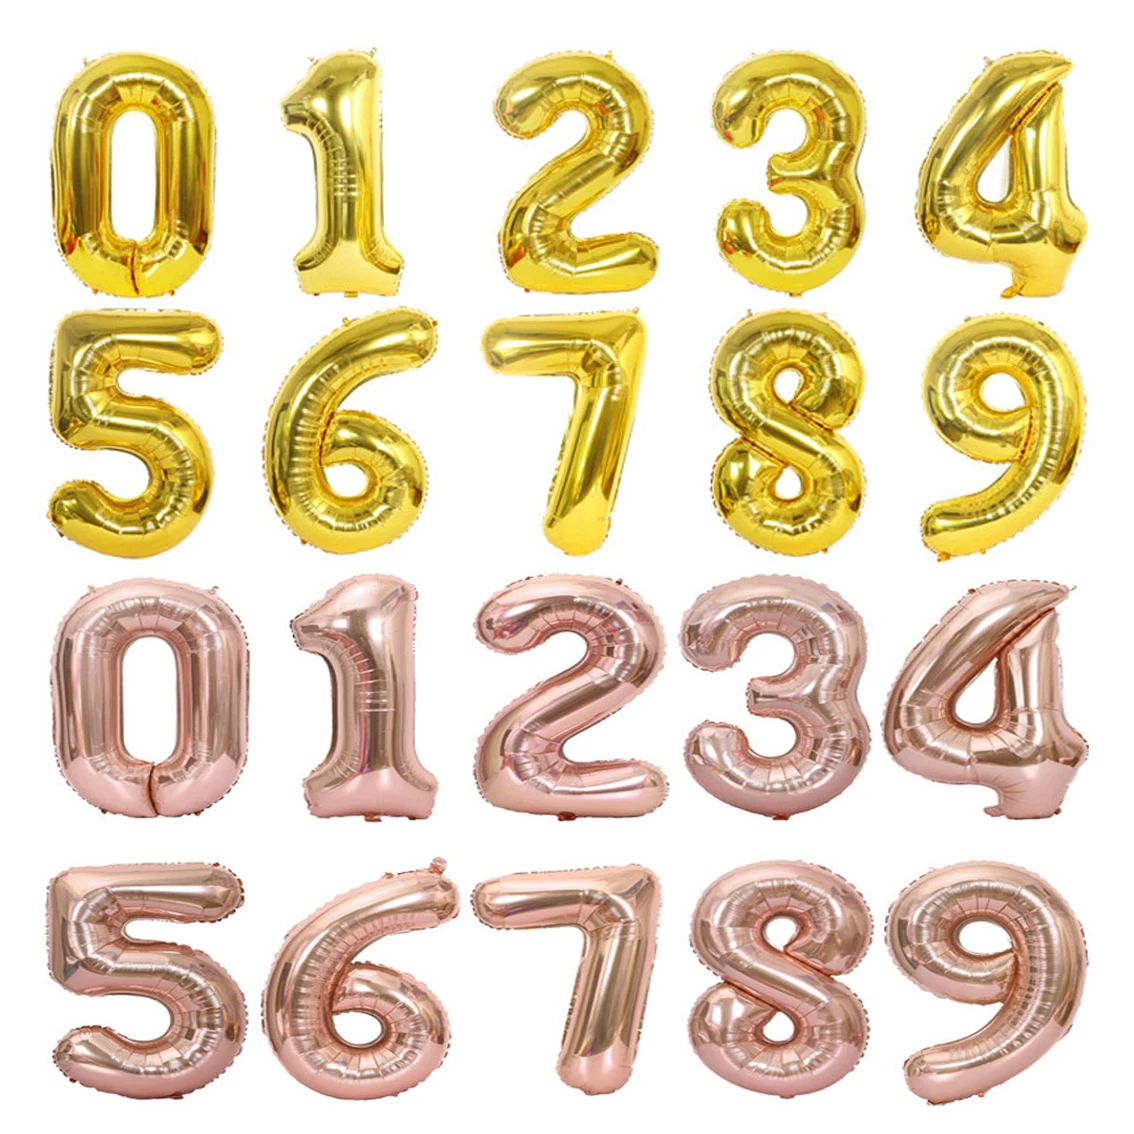 40 inch foil number balloons